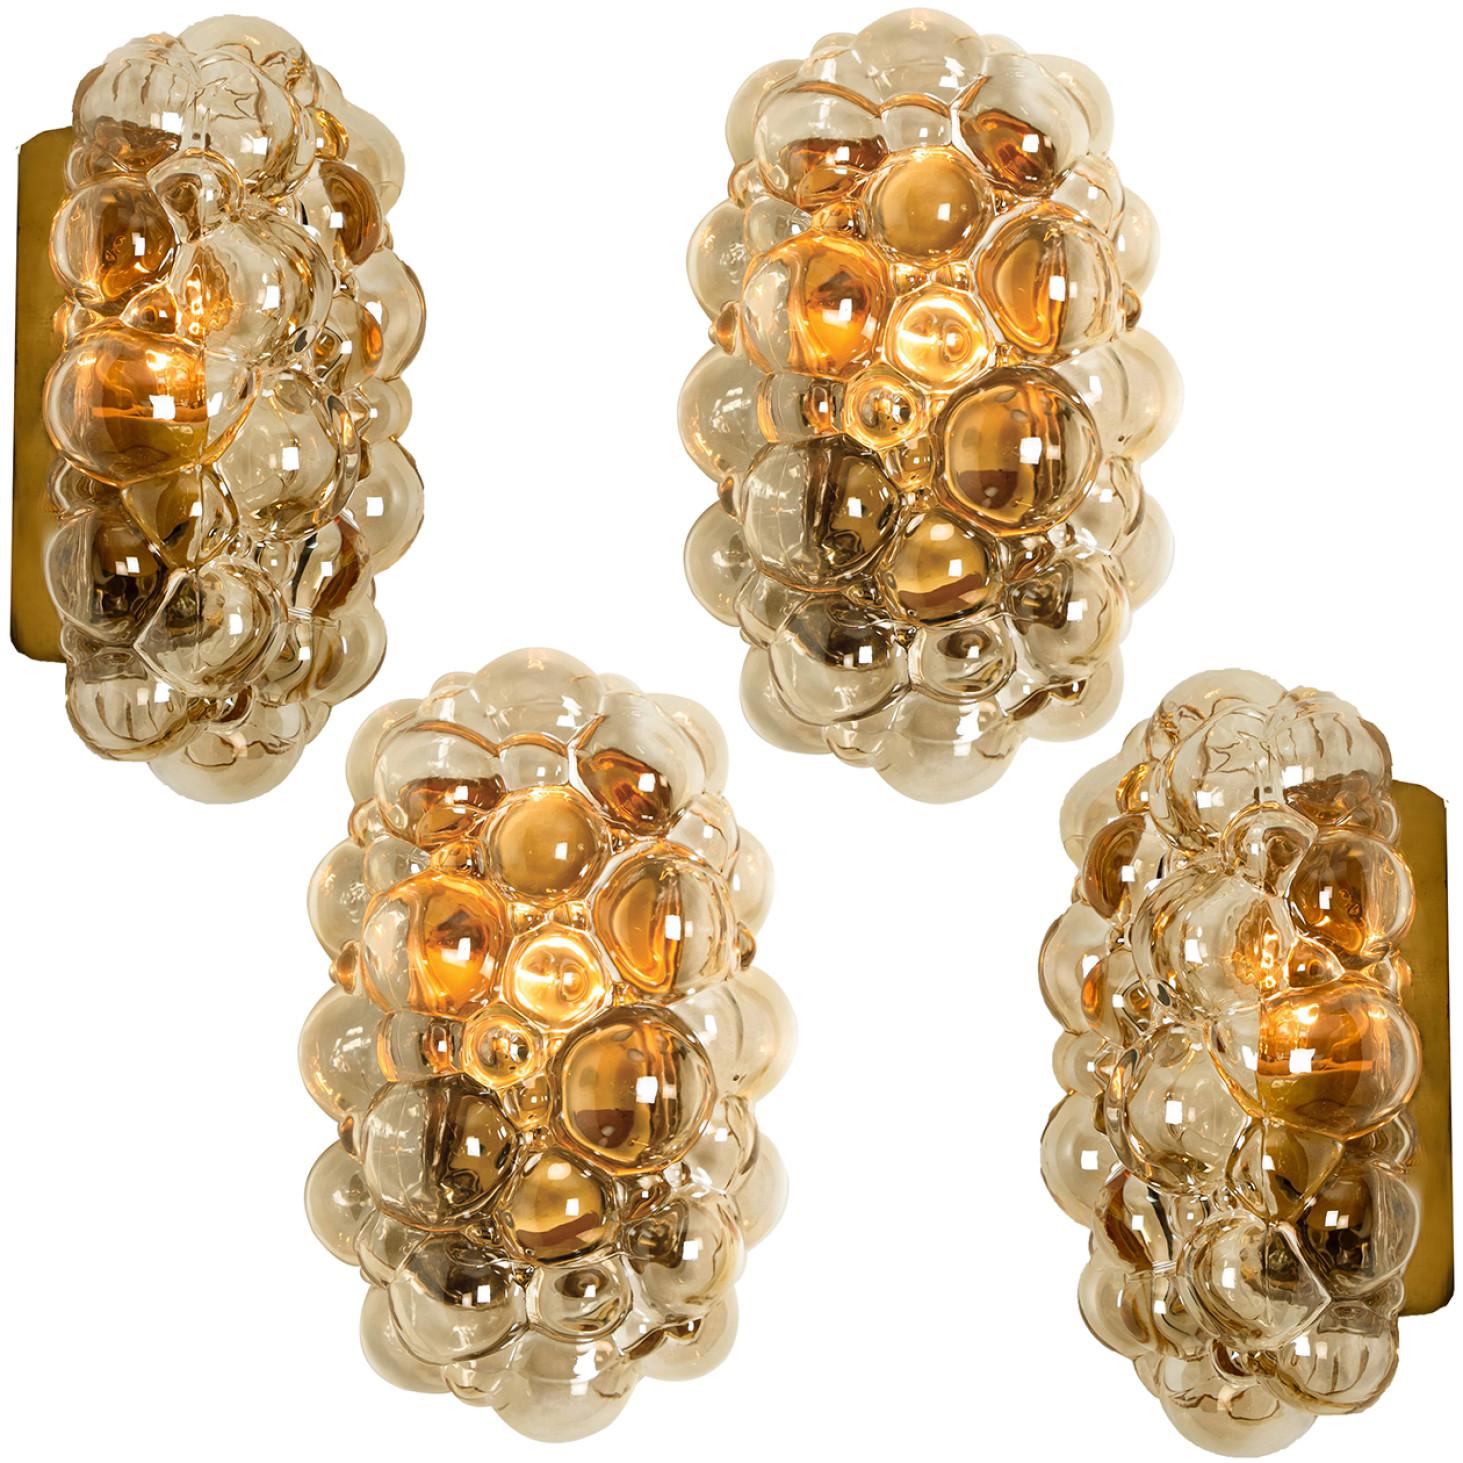 A pair beautiful high-end large bubble wall lights by Helena Tynell for Glashütte Limburg, Germany, 1960s.
Made of glossy amber colored glass with a brass colored base. Illuminates beautifully.

They will be sold as pair . Can work as impressive